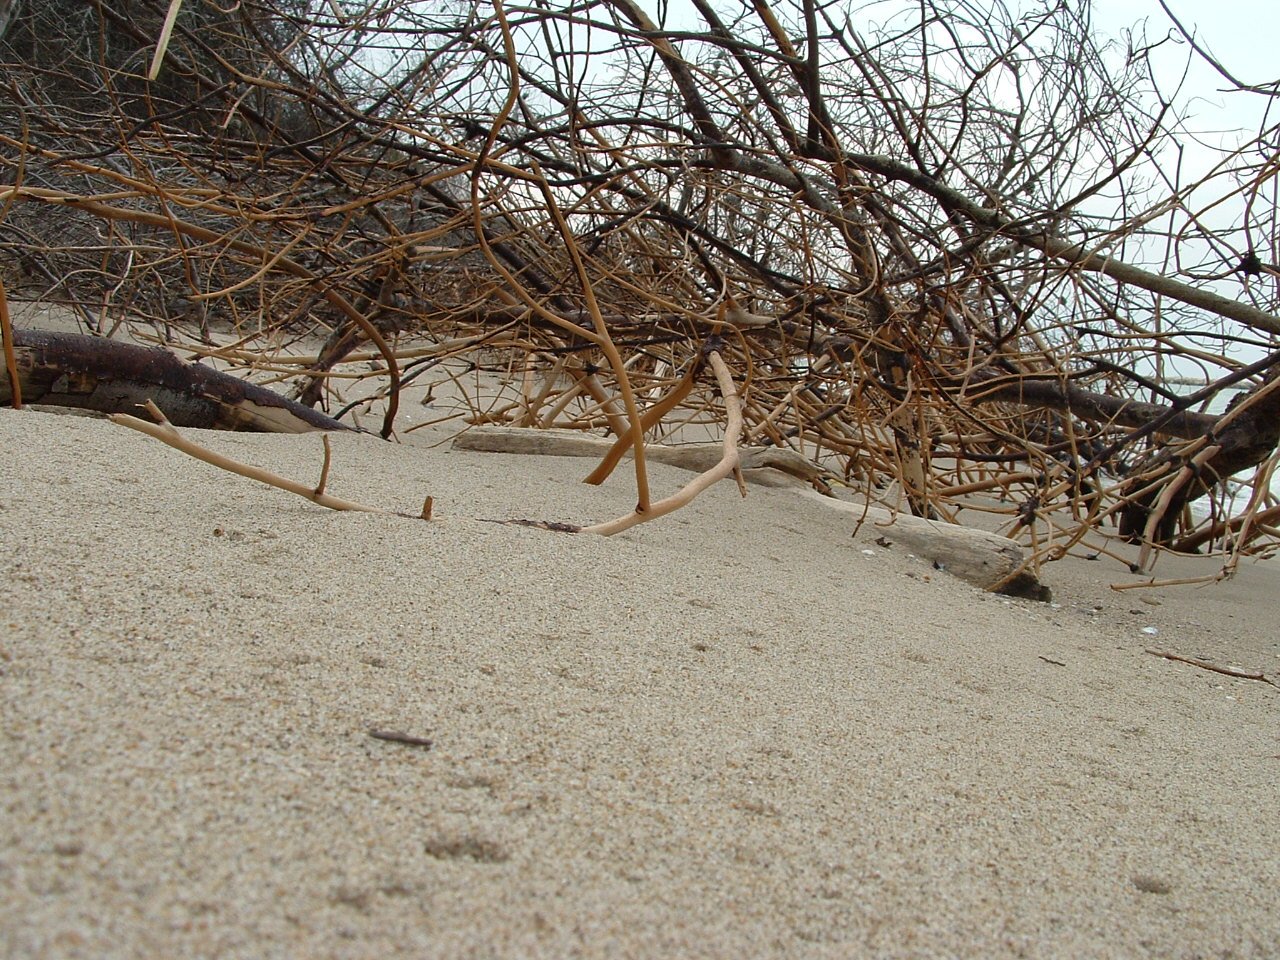 a group of deer's tracks and sticks in the sand